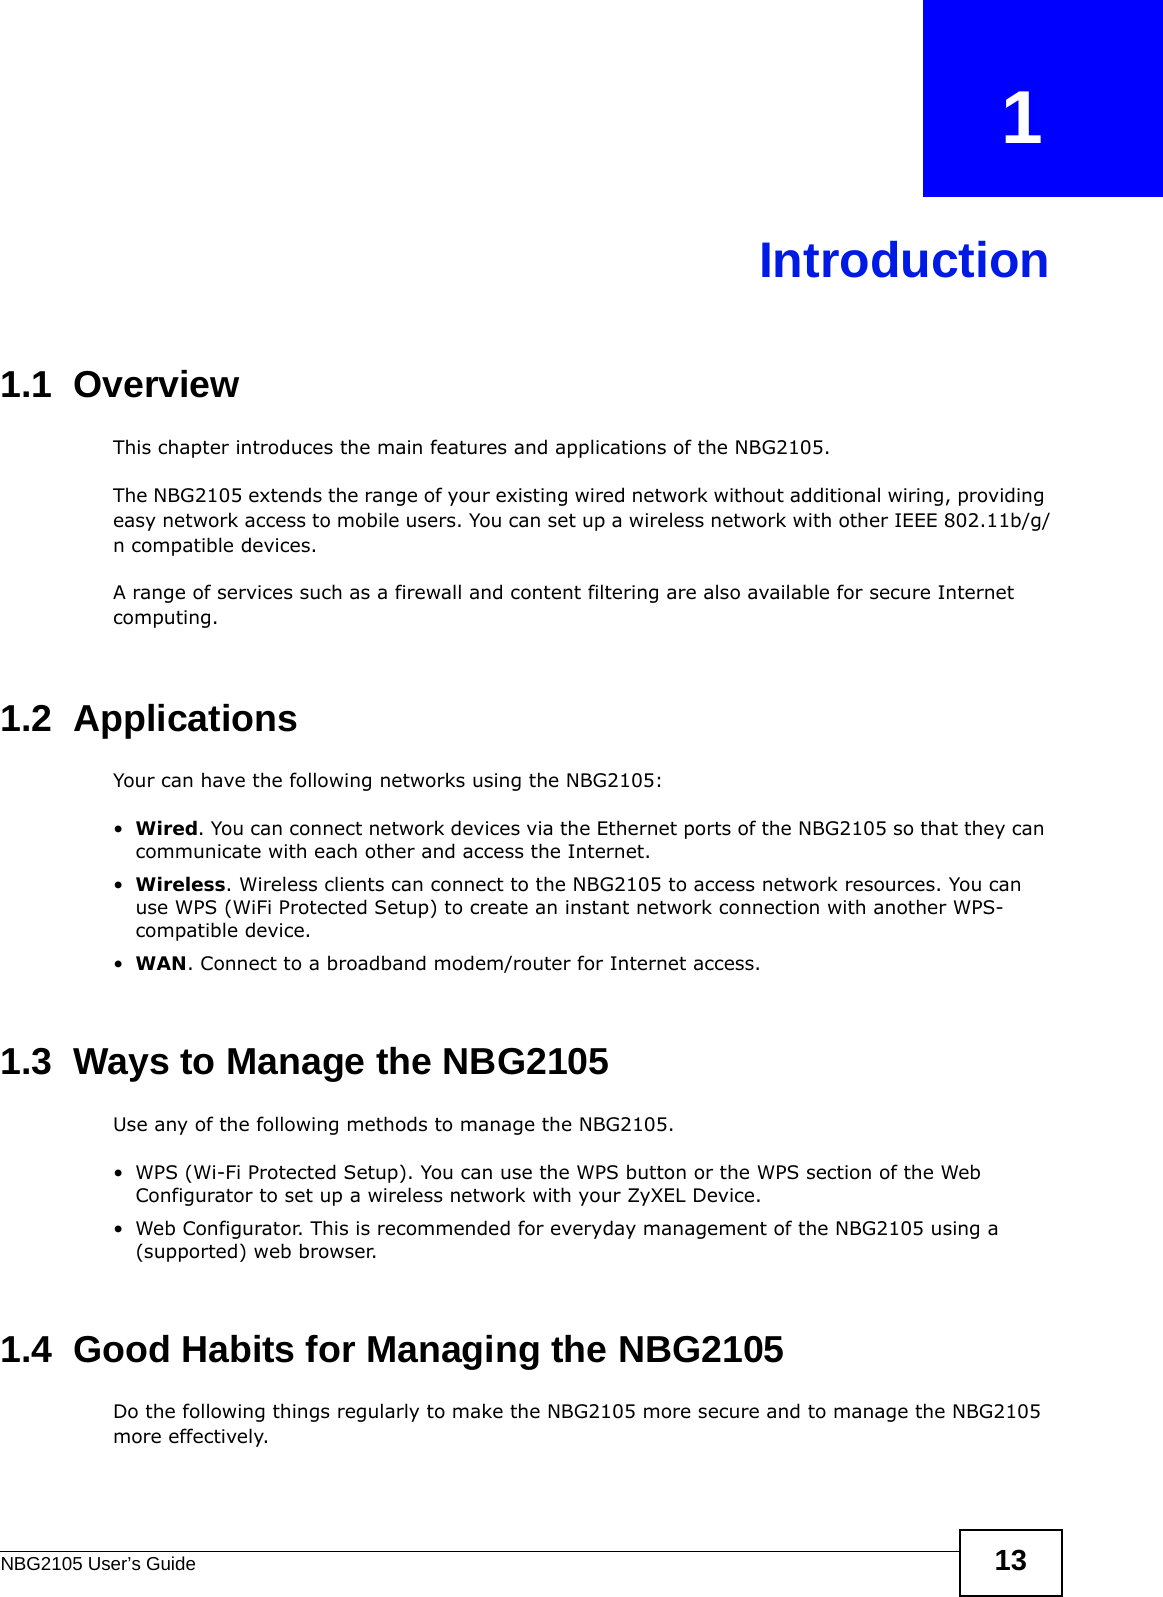 NBG2105 User’s Guide 13CHAPTER   1Introduction1.1  OverviewThis chapter introduces the main features and applications of the NBG2105.The NBG2105 extends the range of your existing wired network without additional wiring, providing easy network access to mobile users. You can set up a wireless network with other IEEE 802.11b/g/n compatible devices.A range of services such as a firewall and content filtering are also available for secure Internet computing. 1.2  ApplicationsYour can have the following networks using the NBG2105:•Wired. You can connect network devices via the Ethernet ports of the NBG2105 so that they can communicate with each other and access the Internet.•Wireless. Wireless clients can connect to the NBG2105 to access network resources. You can use WPS (WiFi Protected Setup) to create an instant network connection with another WPS-compatible device.•WAN. Connect to a broadband modem/router for Internet access.1.3  Ways to Manage the NBG2105Use any of the following methods to manage the NBG2105.• WPS (Wi-Fi Protected Setup). You can use the WPS button or the WPS section of the Web Configurator to set up a wireless network with your ZyXEL Device.• Web Configurator. This is recommended for everyday management of the NBG2105 using a (supported) web browser.1.4  Good Habits for Managing the NBG2105Do the following things regularly to make the NBG2105 more secure and to manage the NBG2105 more effectively.